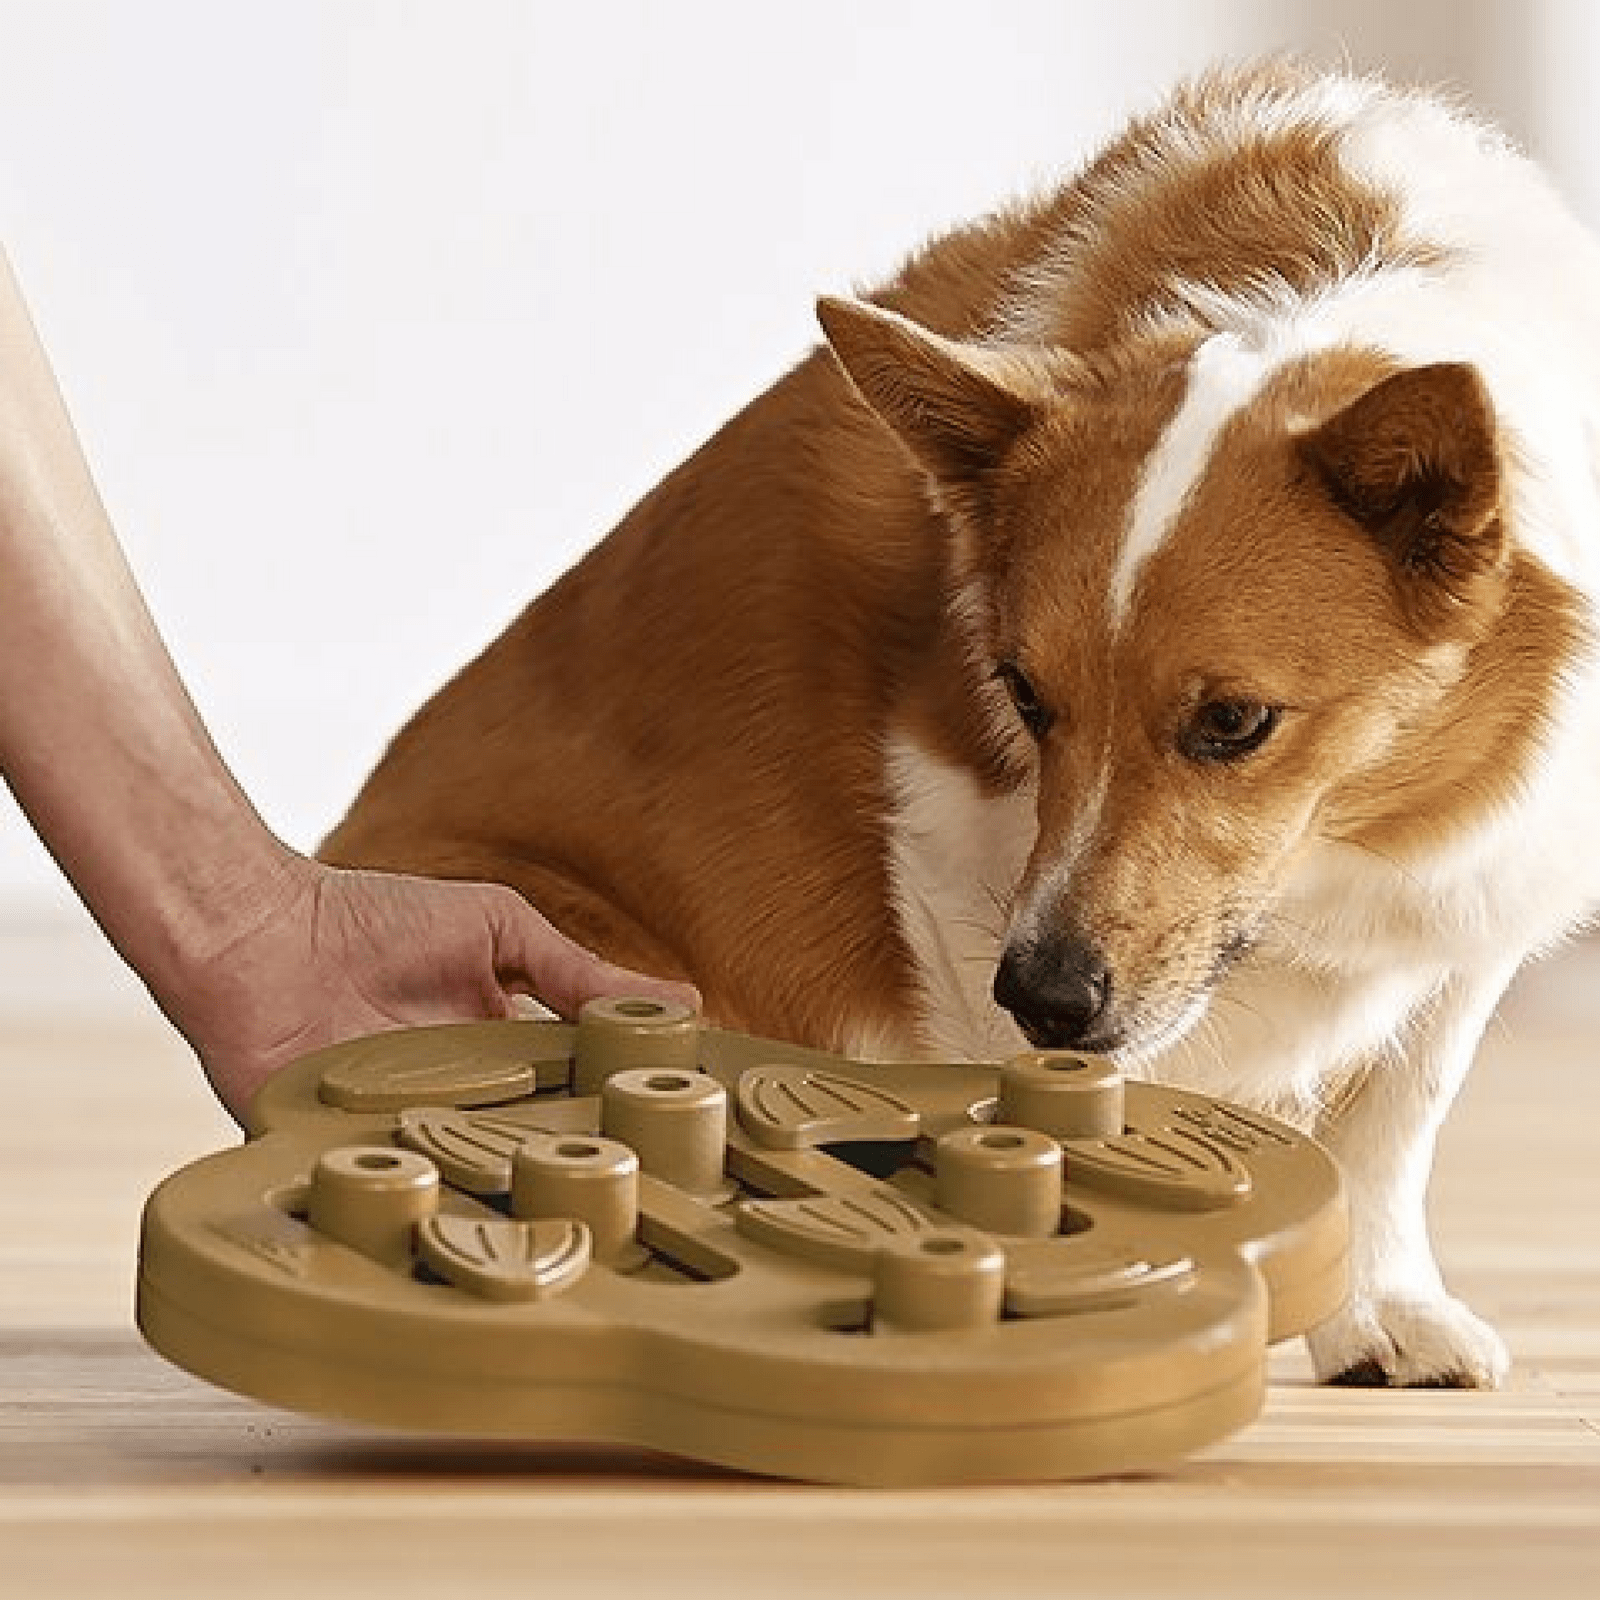 https://cdn.shopify.com/s/files/1/1733/0973/products/outward-hound-dog-toy-nina-ottosson-dog-puzzle-toy-interactive-treat-dispenser-hide-n-slide-31864228151495.png?v=1635181390